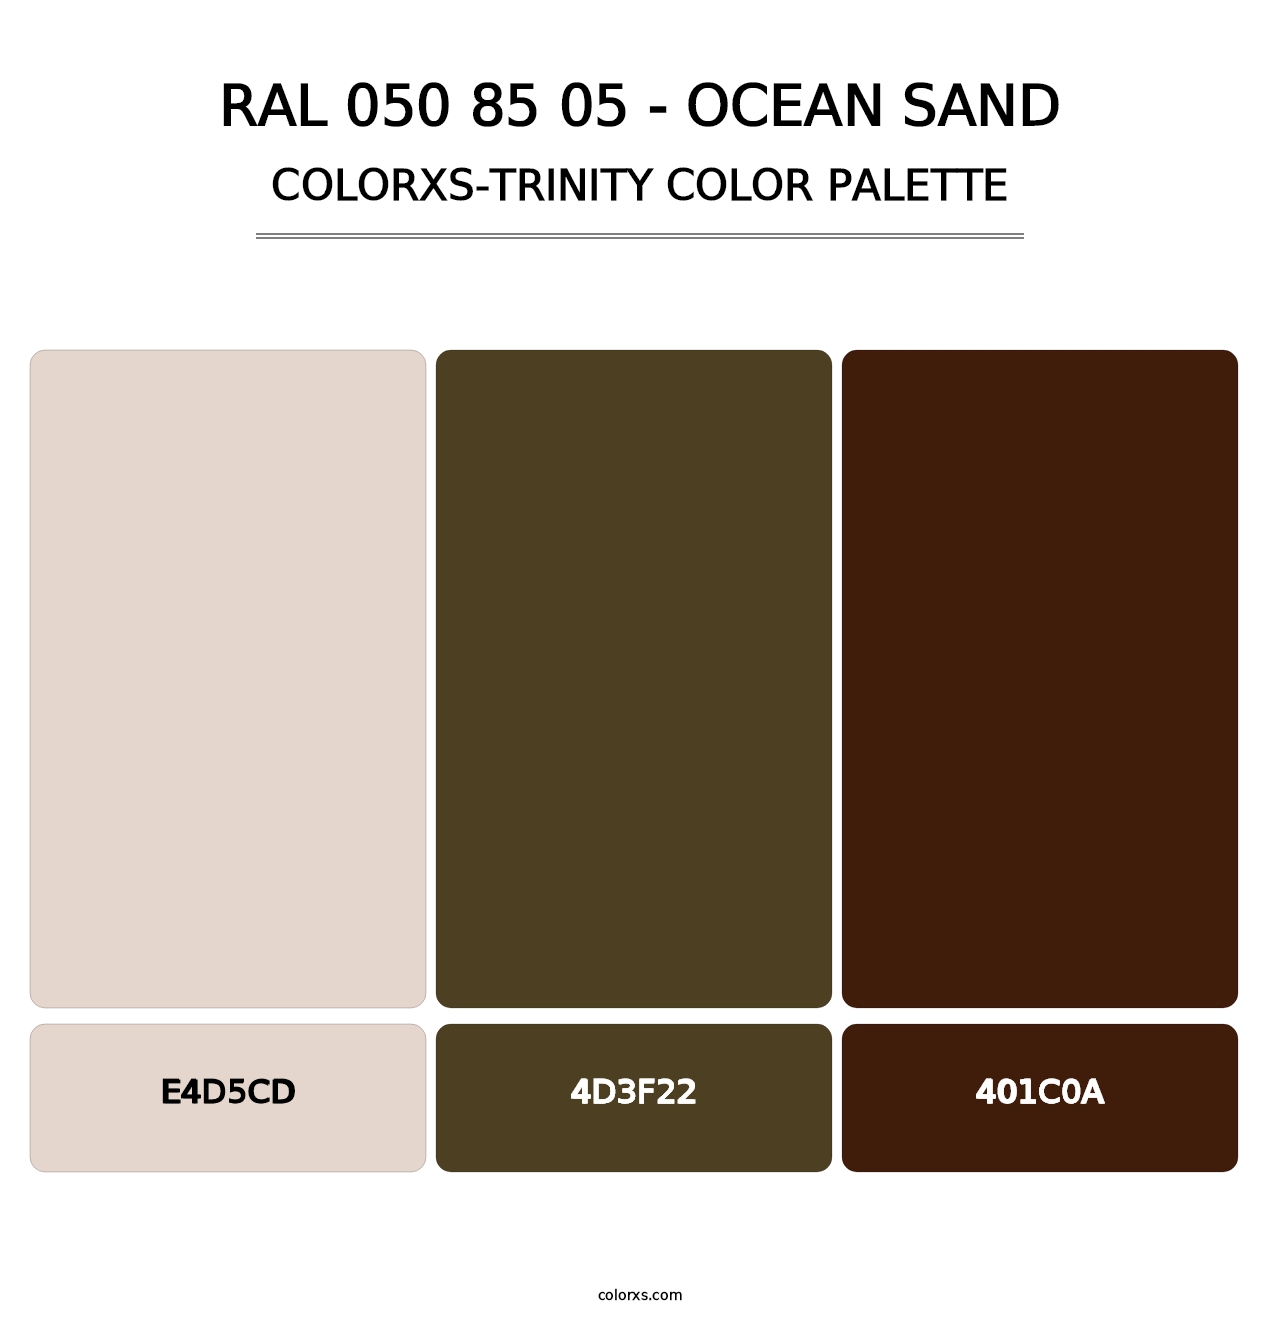 RAL 050 85 05 - Ocean Sand - Colorxs Trinity Palette